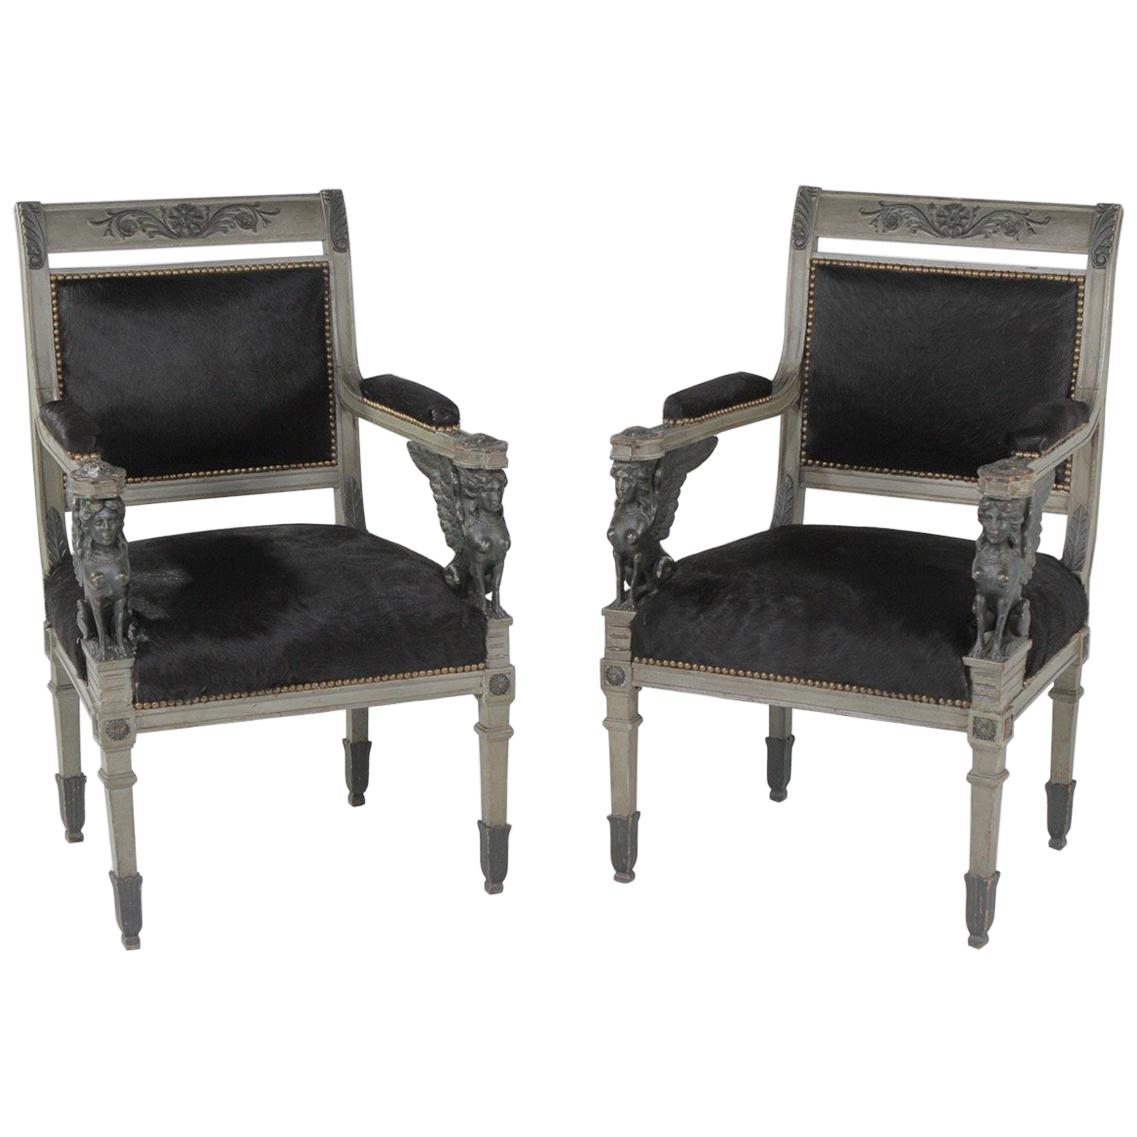 Superb Neoclassical Egyptian Revival Armchairs with Black Cowhide Upholstery